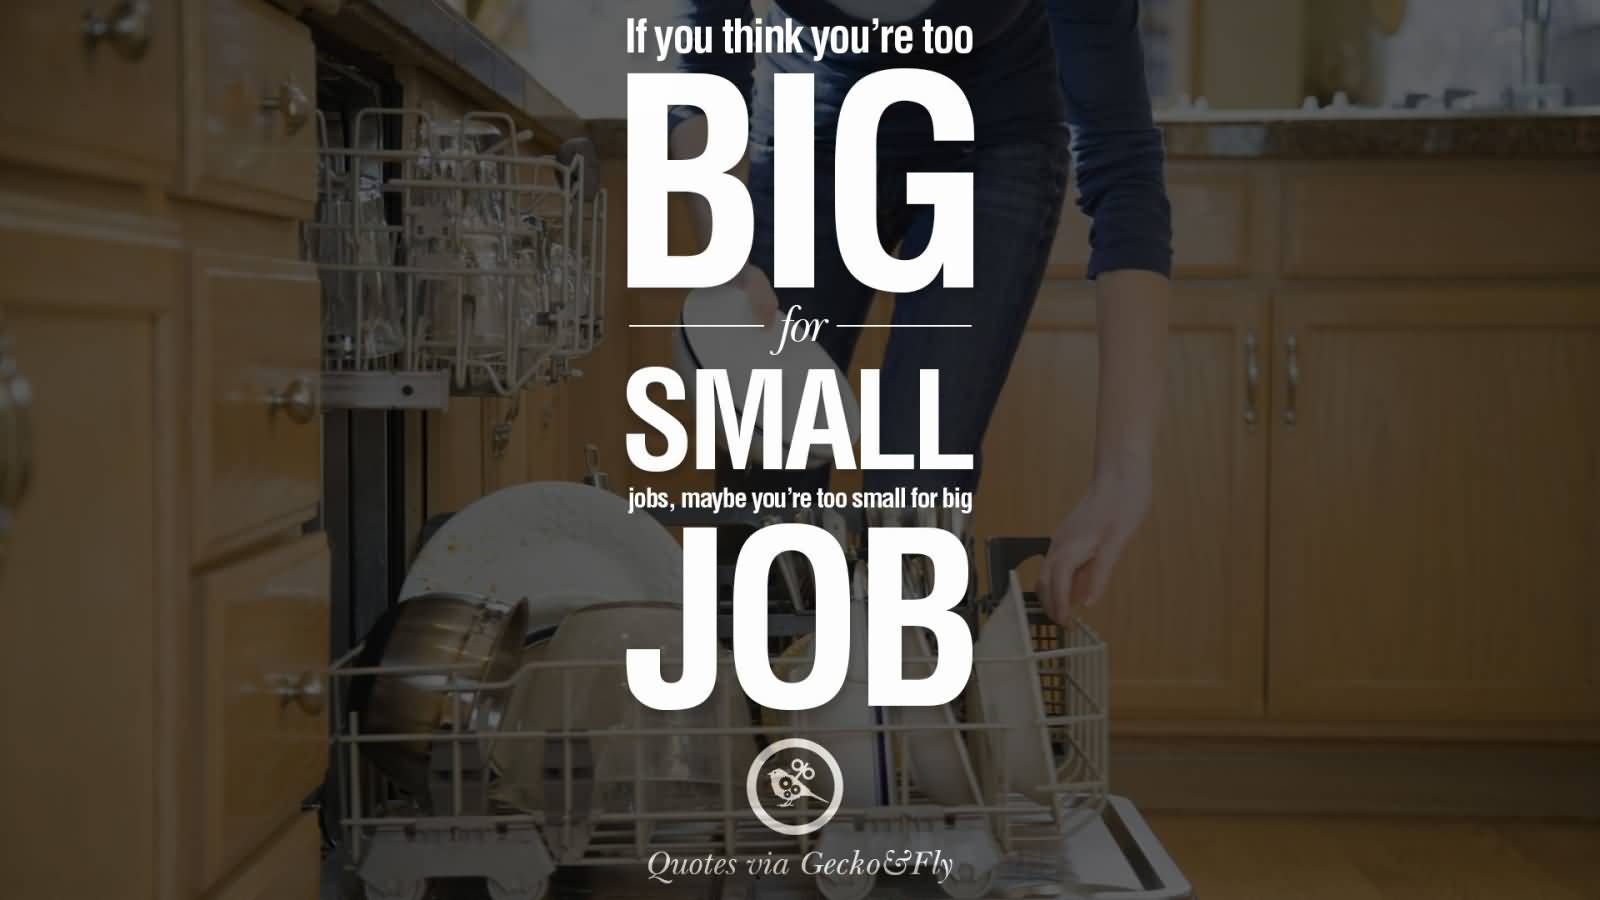 If you think you’re too big for small jobs, maybe you’re too small for big job.